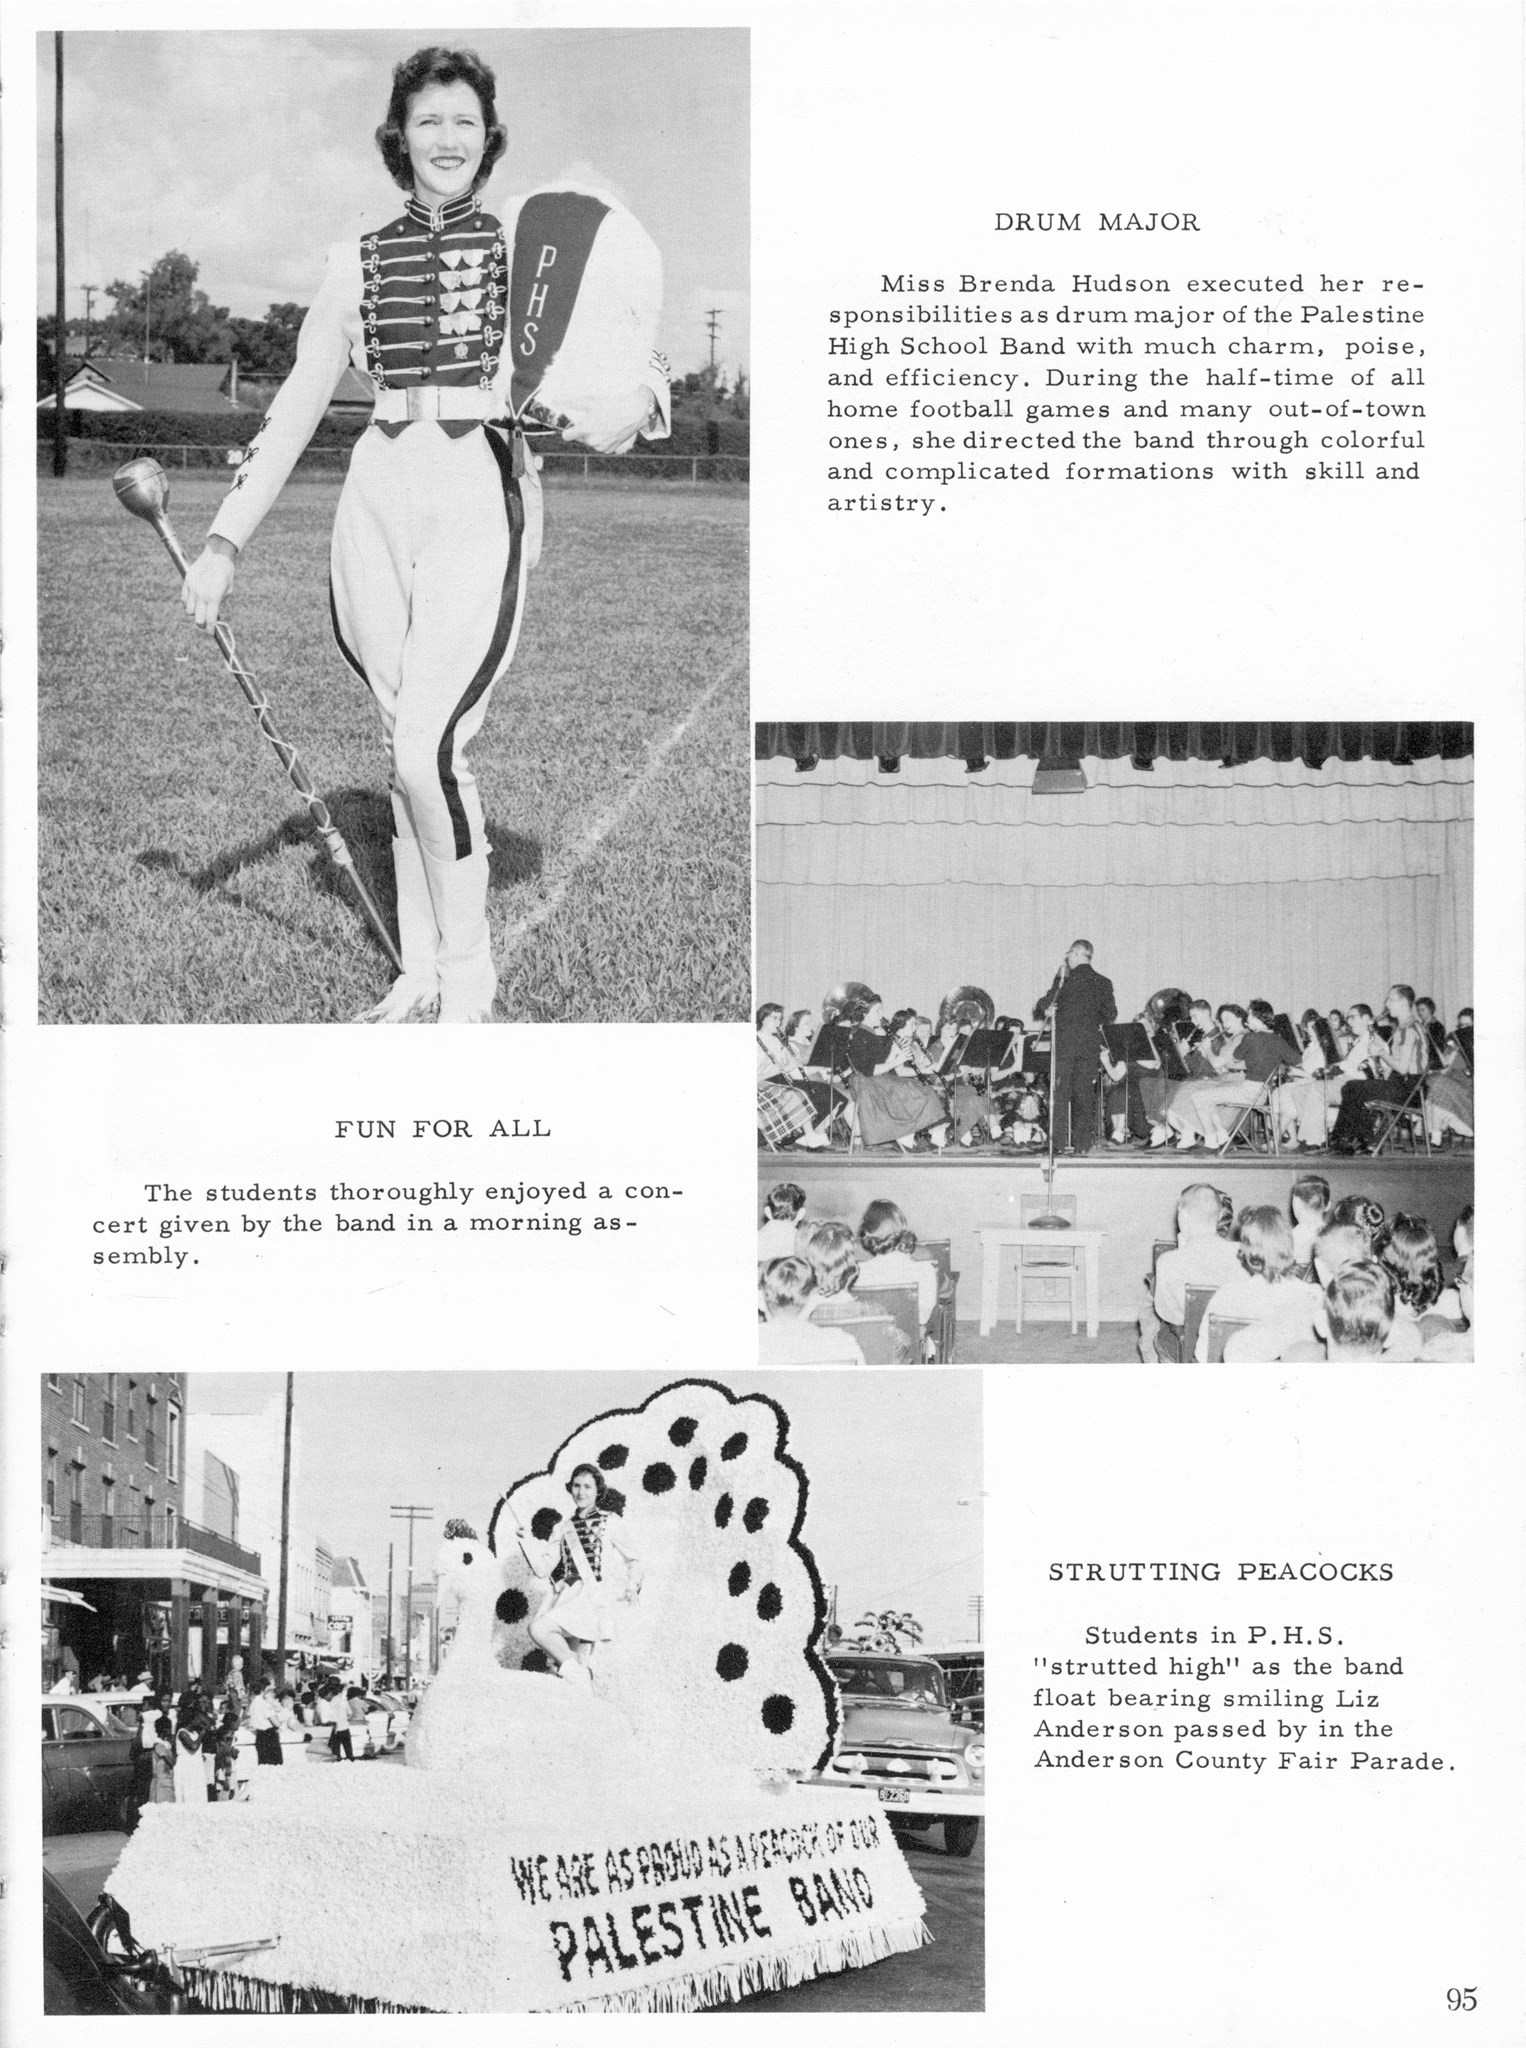 ../../../Images/Large/1959/Arclight-1959-pg0095.jpg